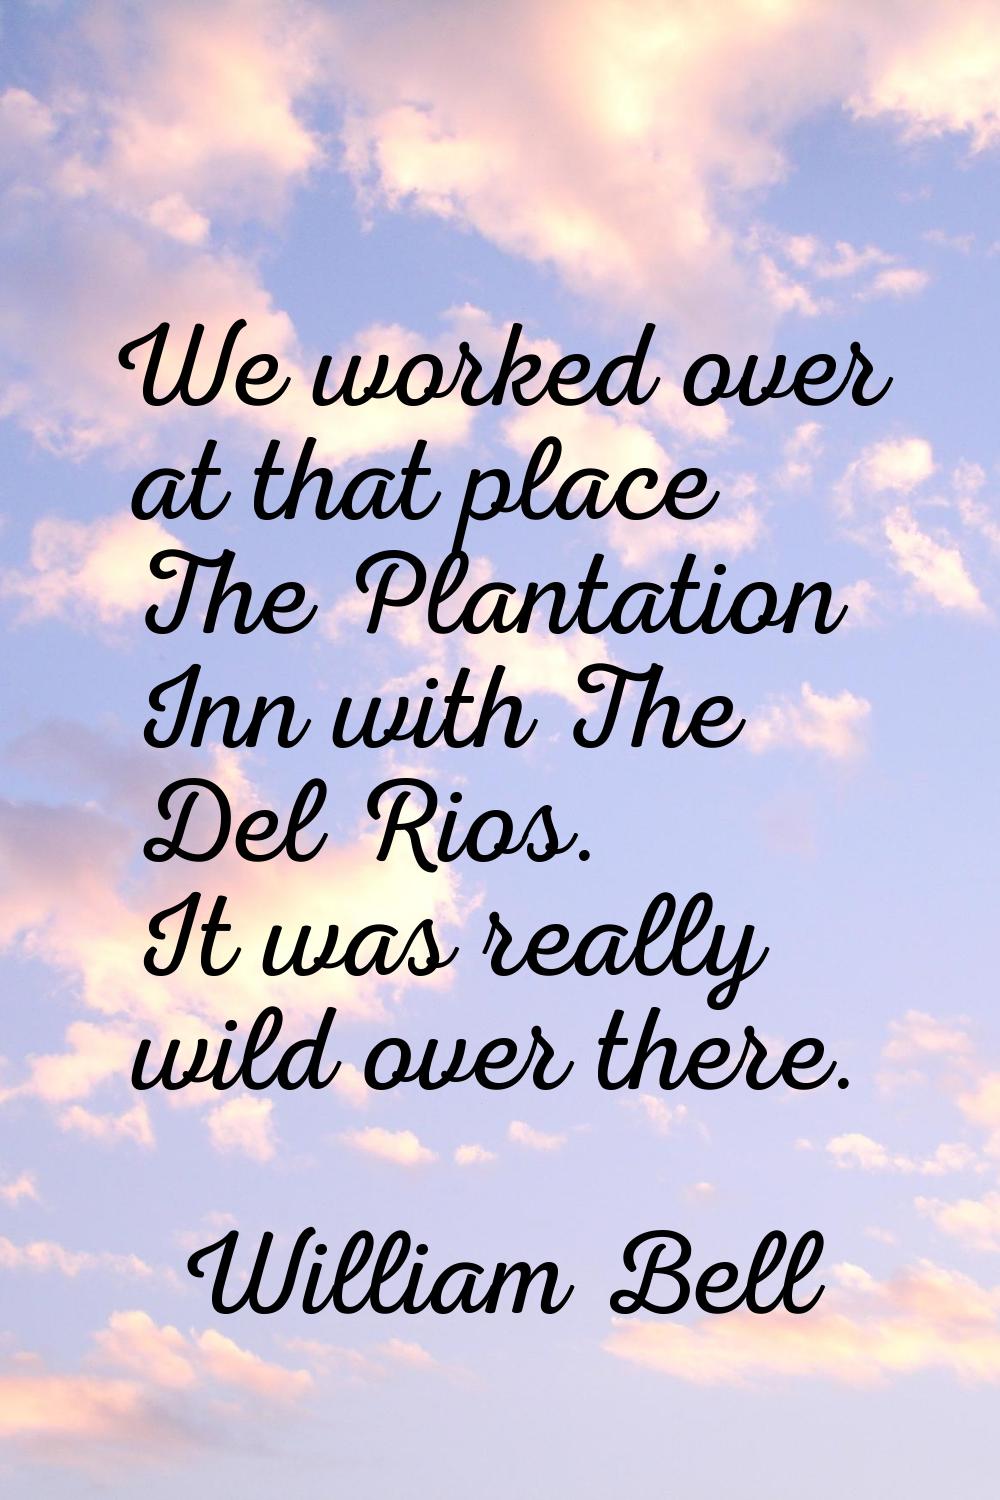 We worked over at that place The Plantation Inn with The Del Rios. It was really wild over there.